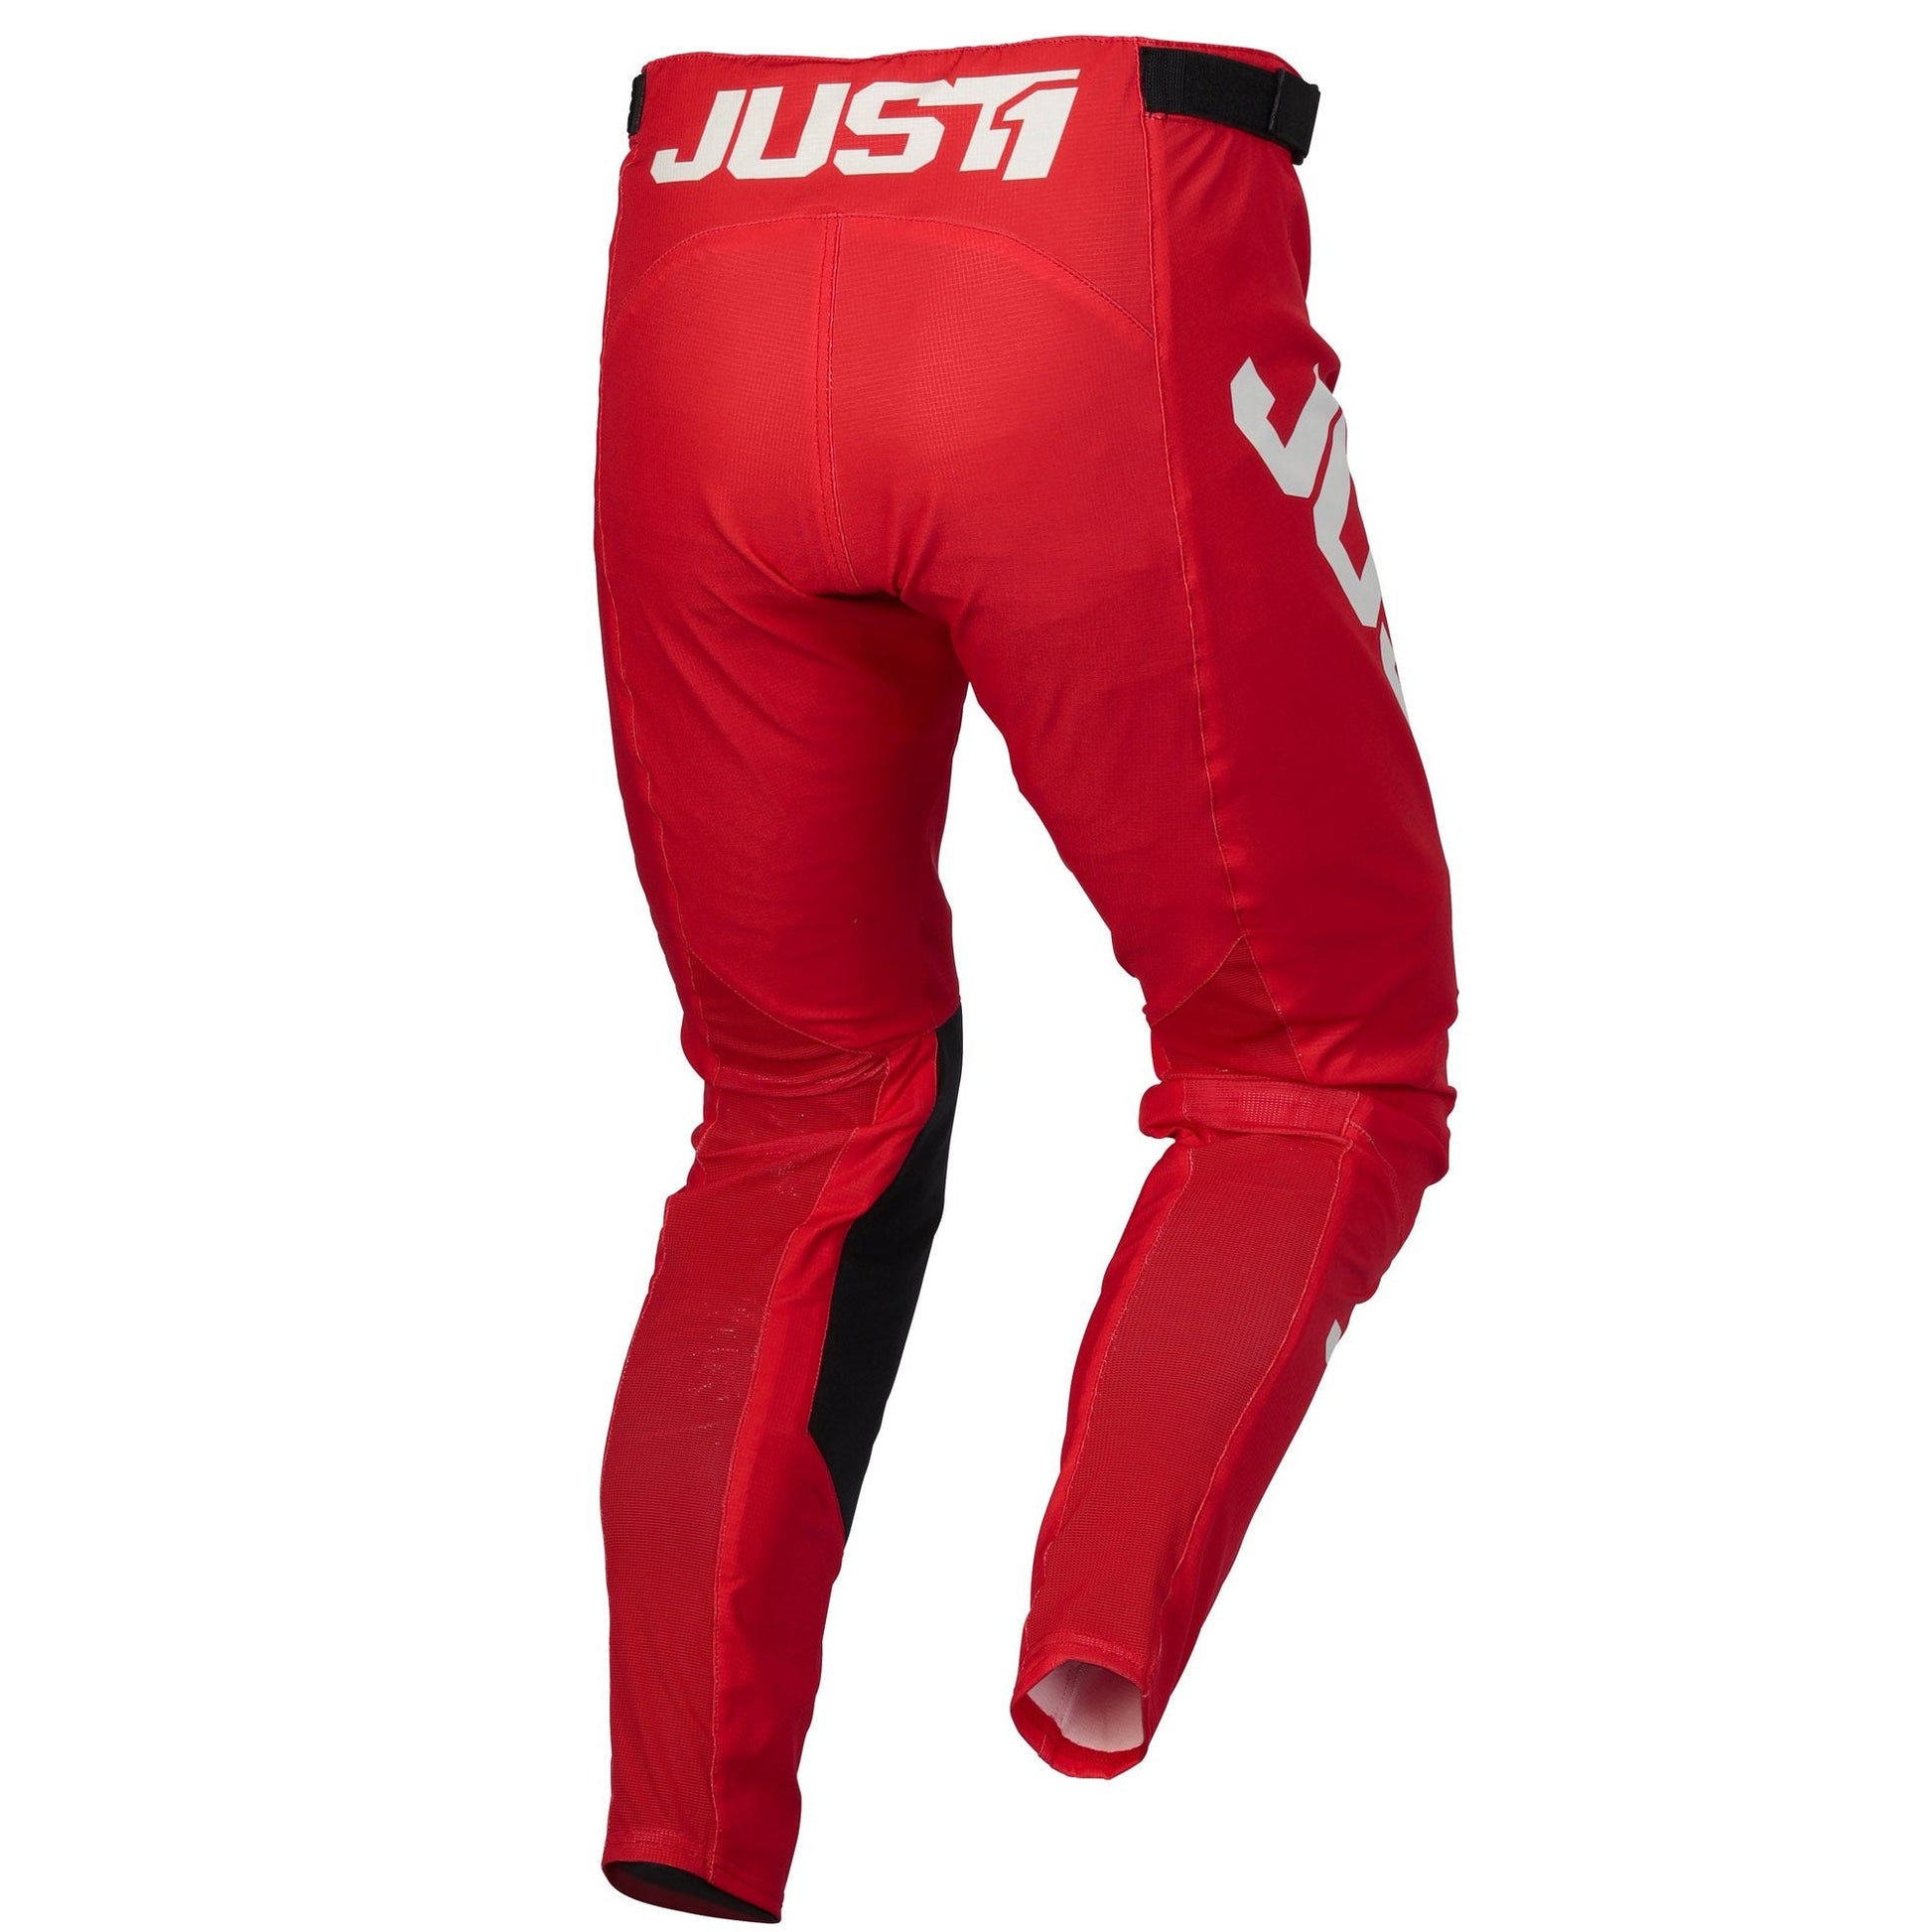 Just1 2022 J-Essential Youth Pants Red - Just1